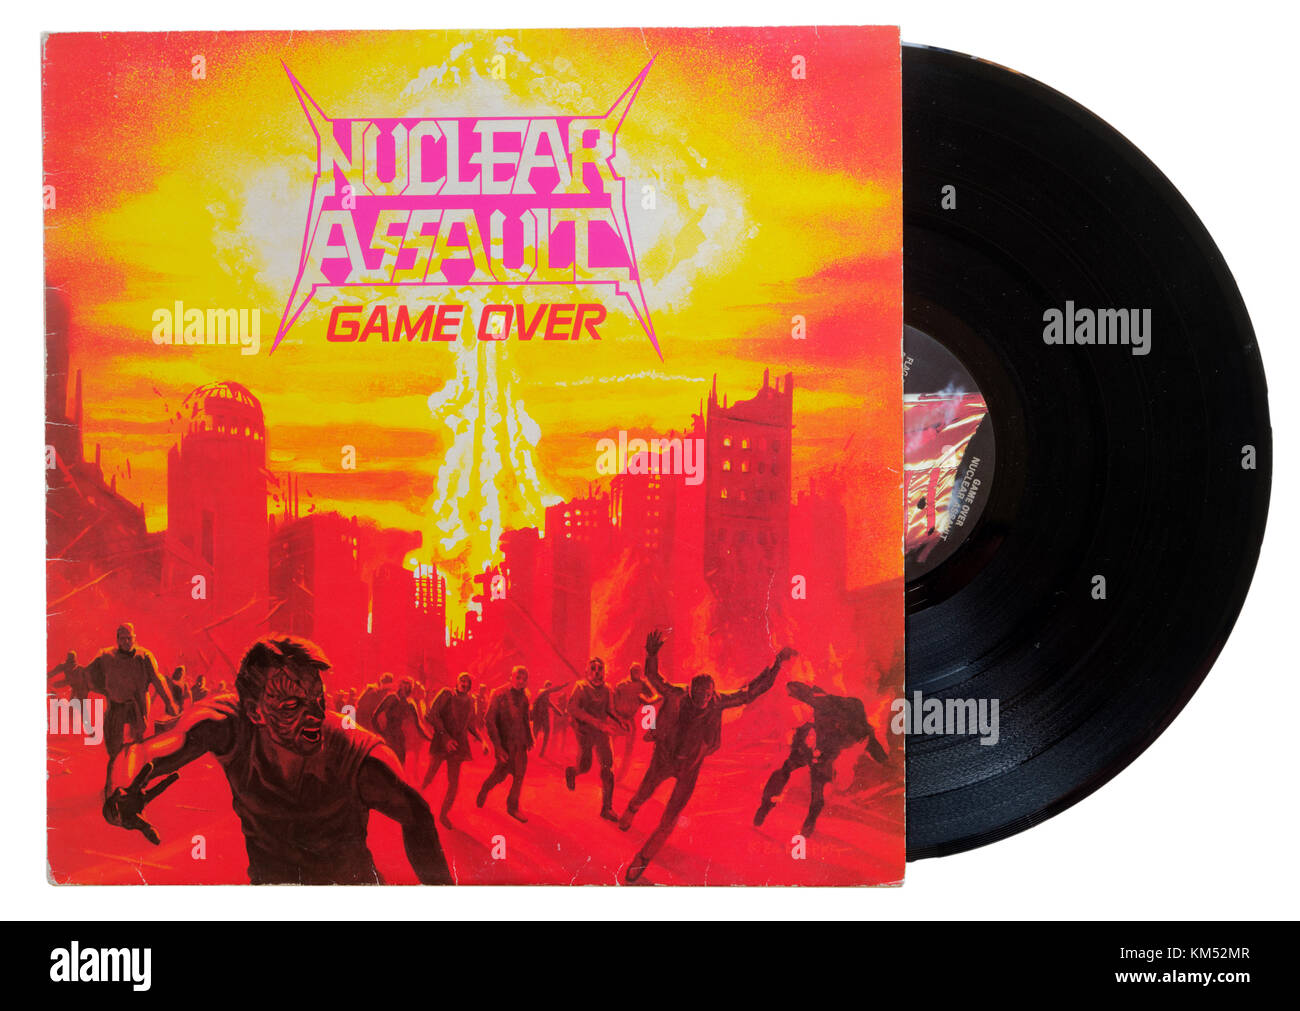 Nuclear Assault Game Over album Stockfoto